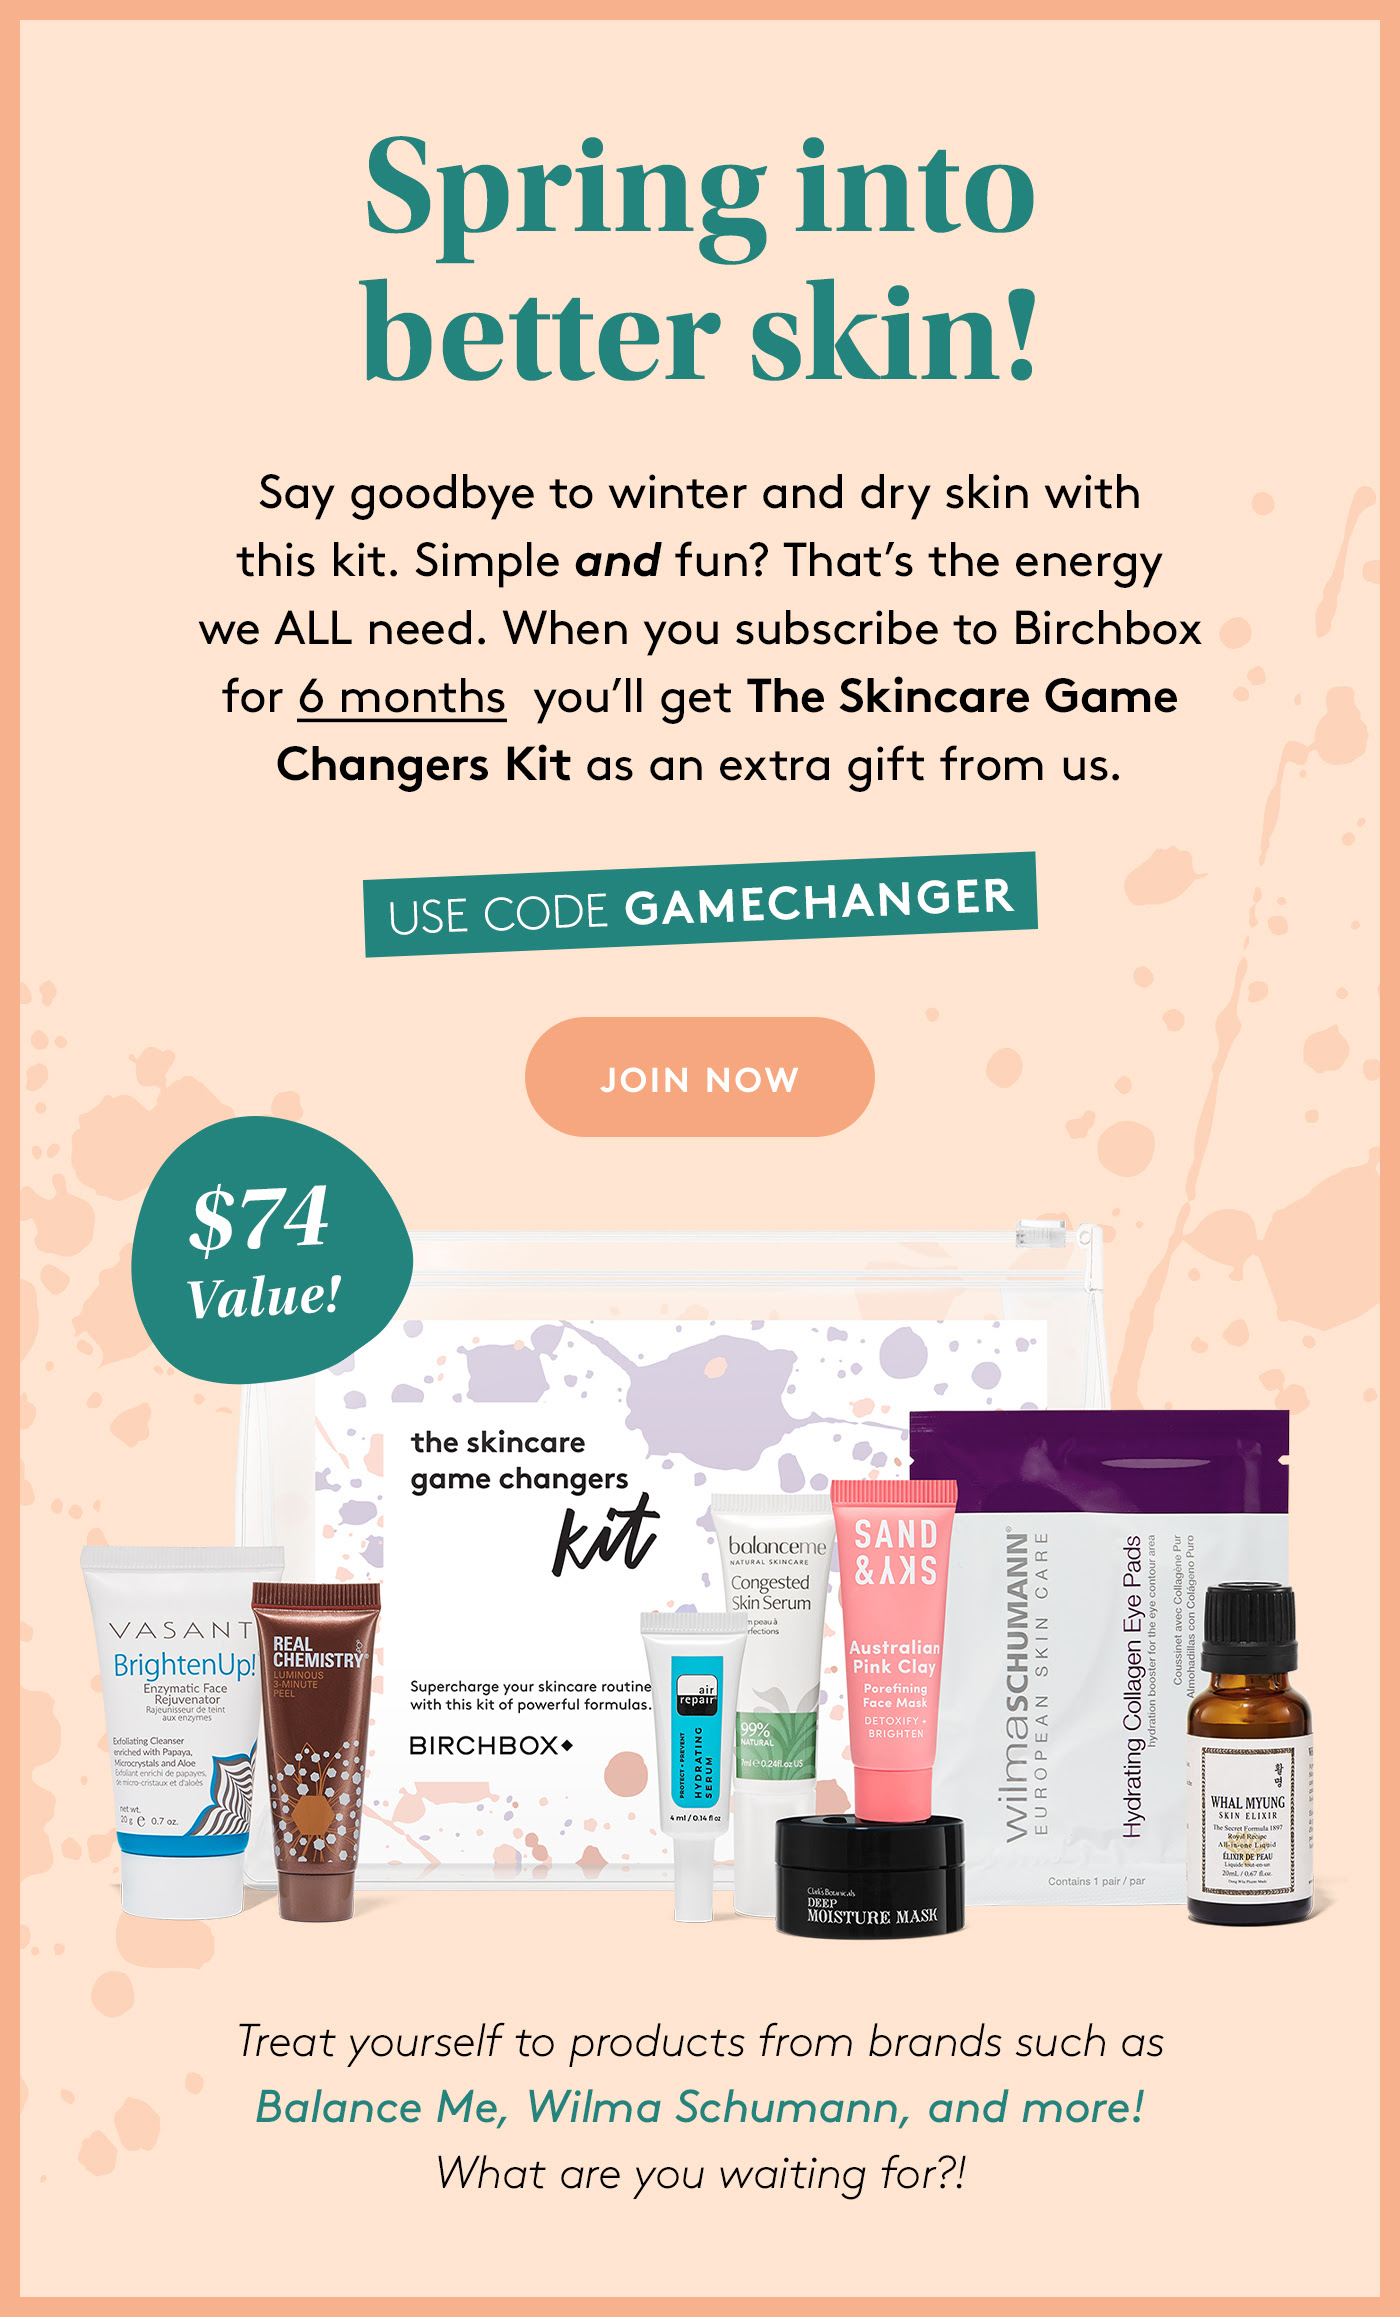 Birchbox Coupon – FREE Skincare Game Changers Kit With Subscription!